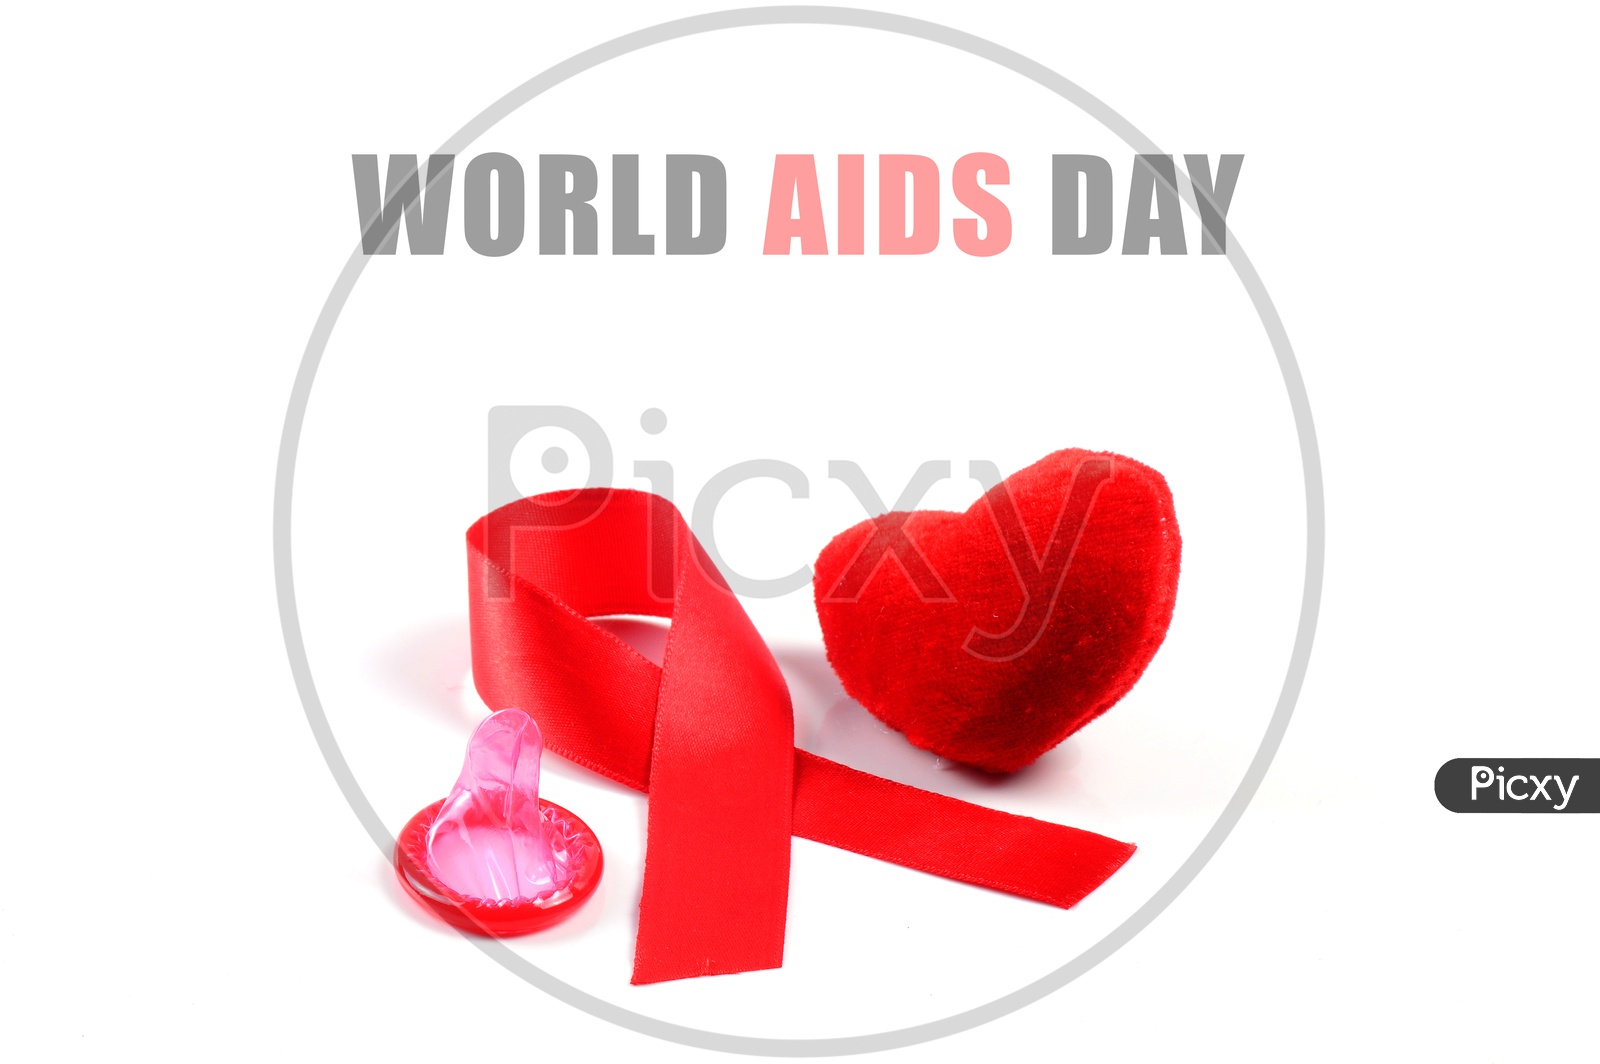 Aids ribbon, condom and heart on white background.